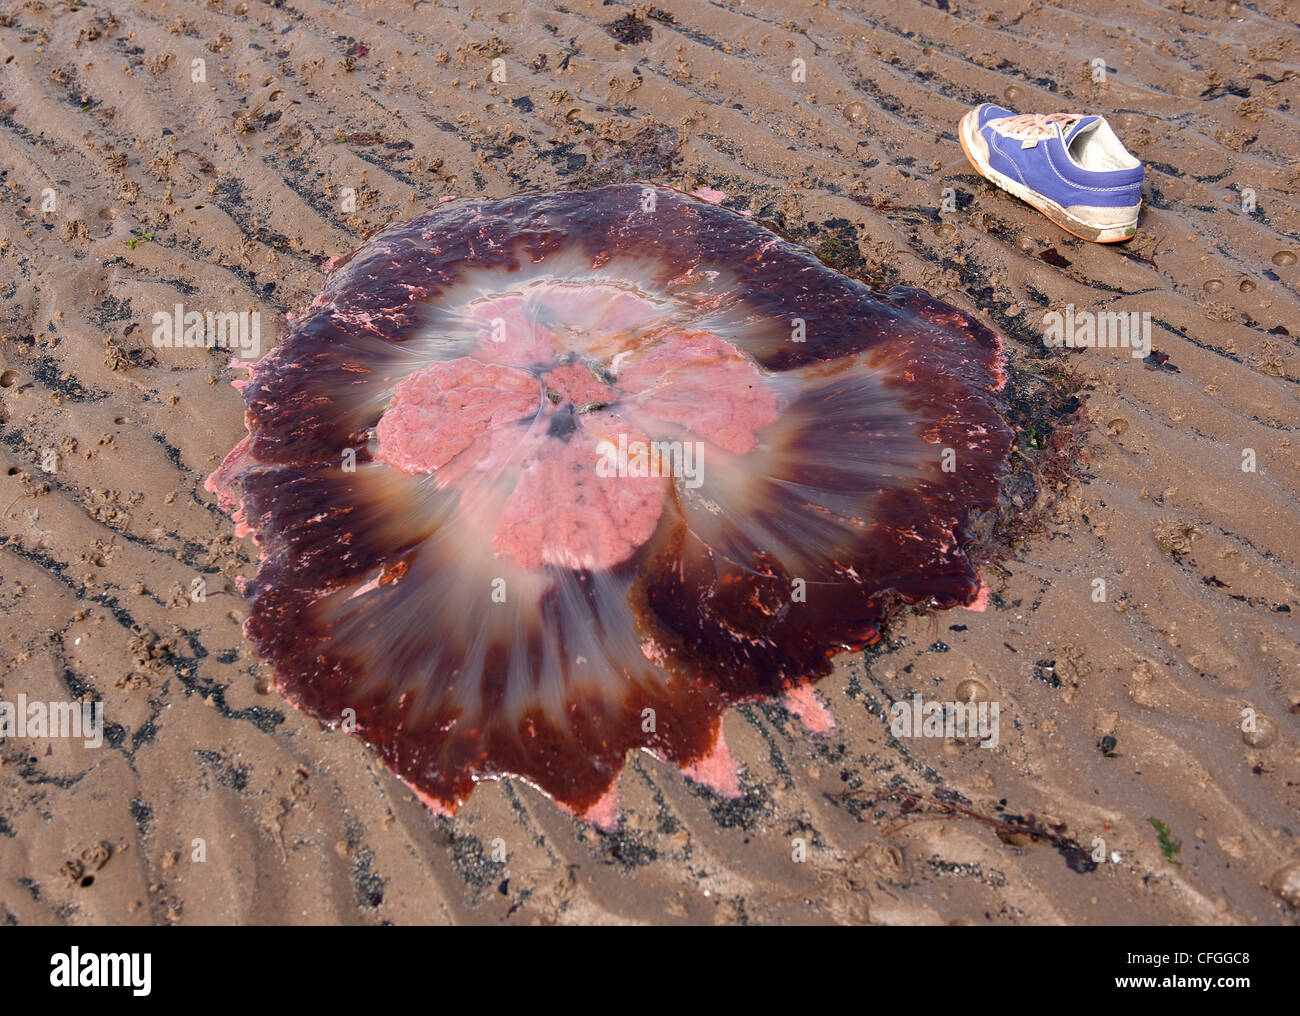 A stranded giant pink and red jelly fish on the sand on a beach beside a shoe showing scale. Stock Photo